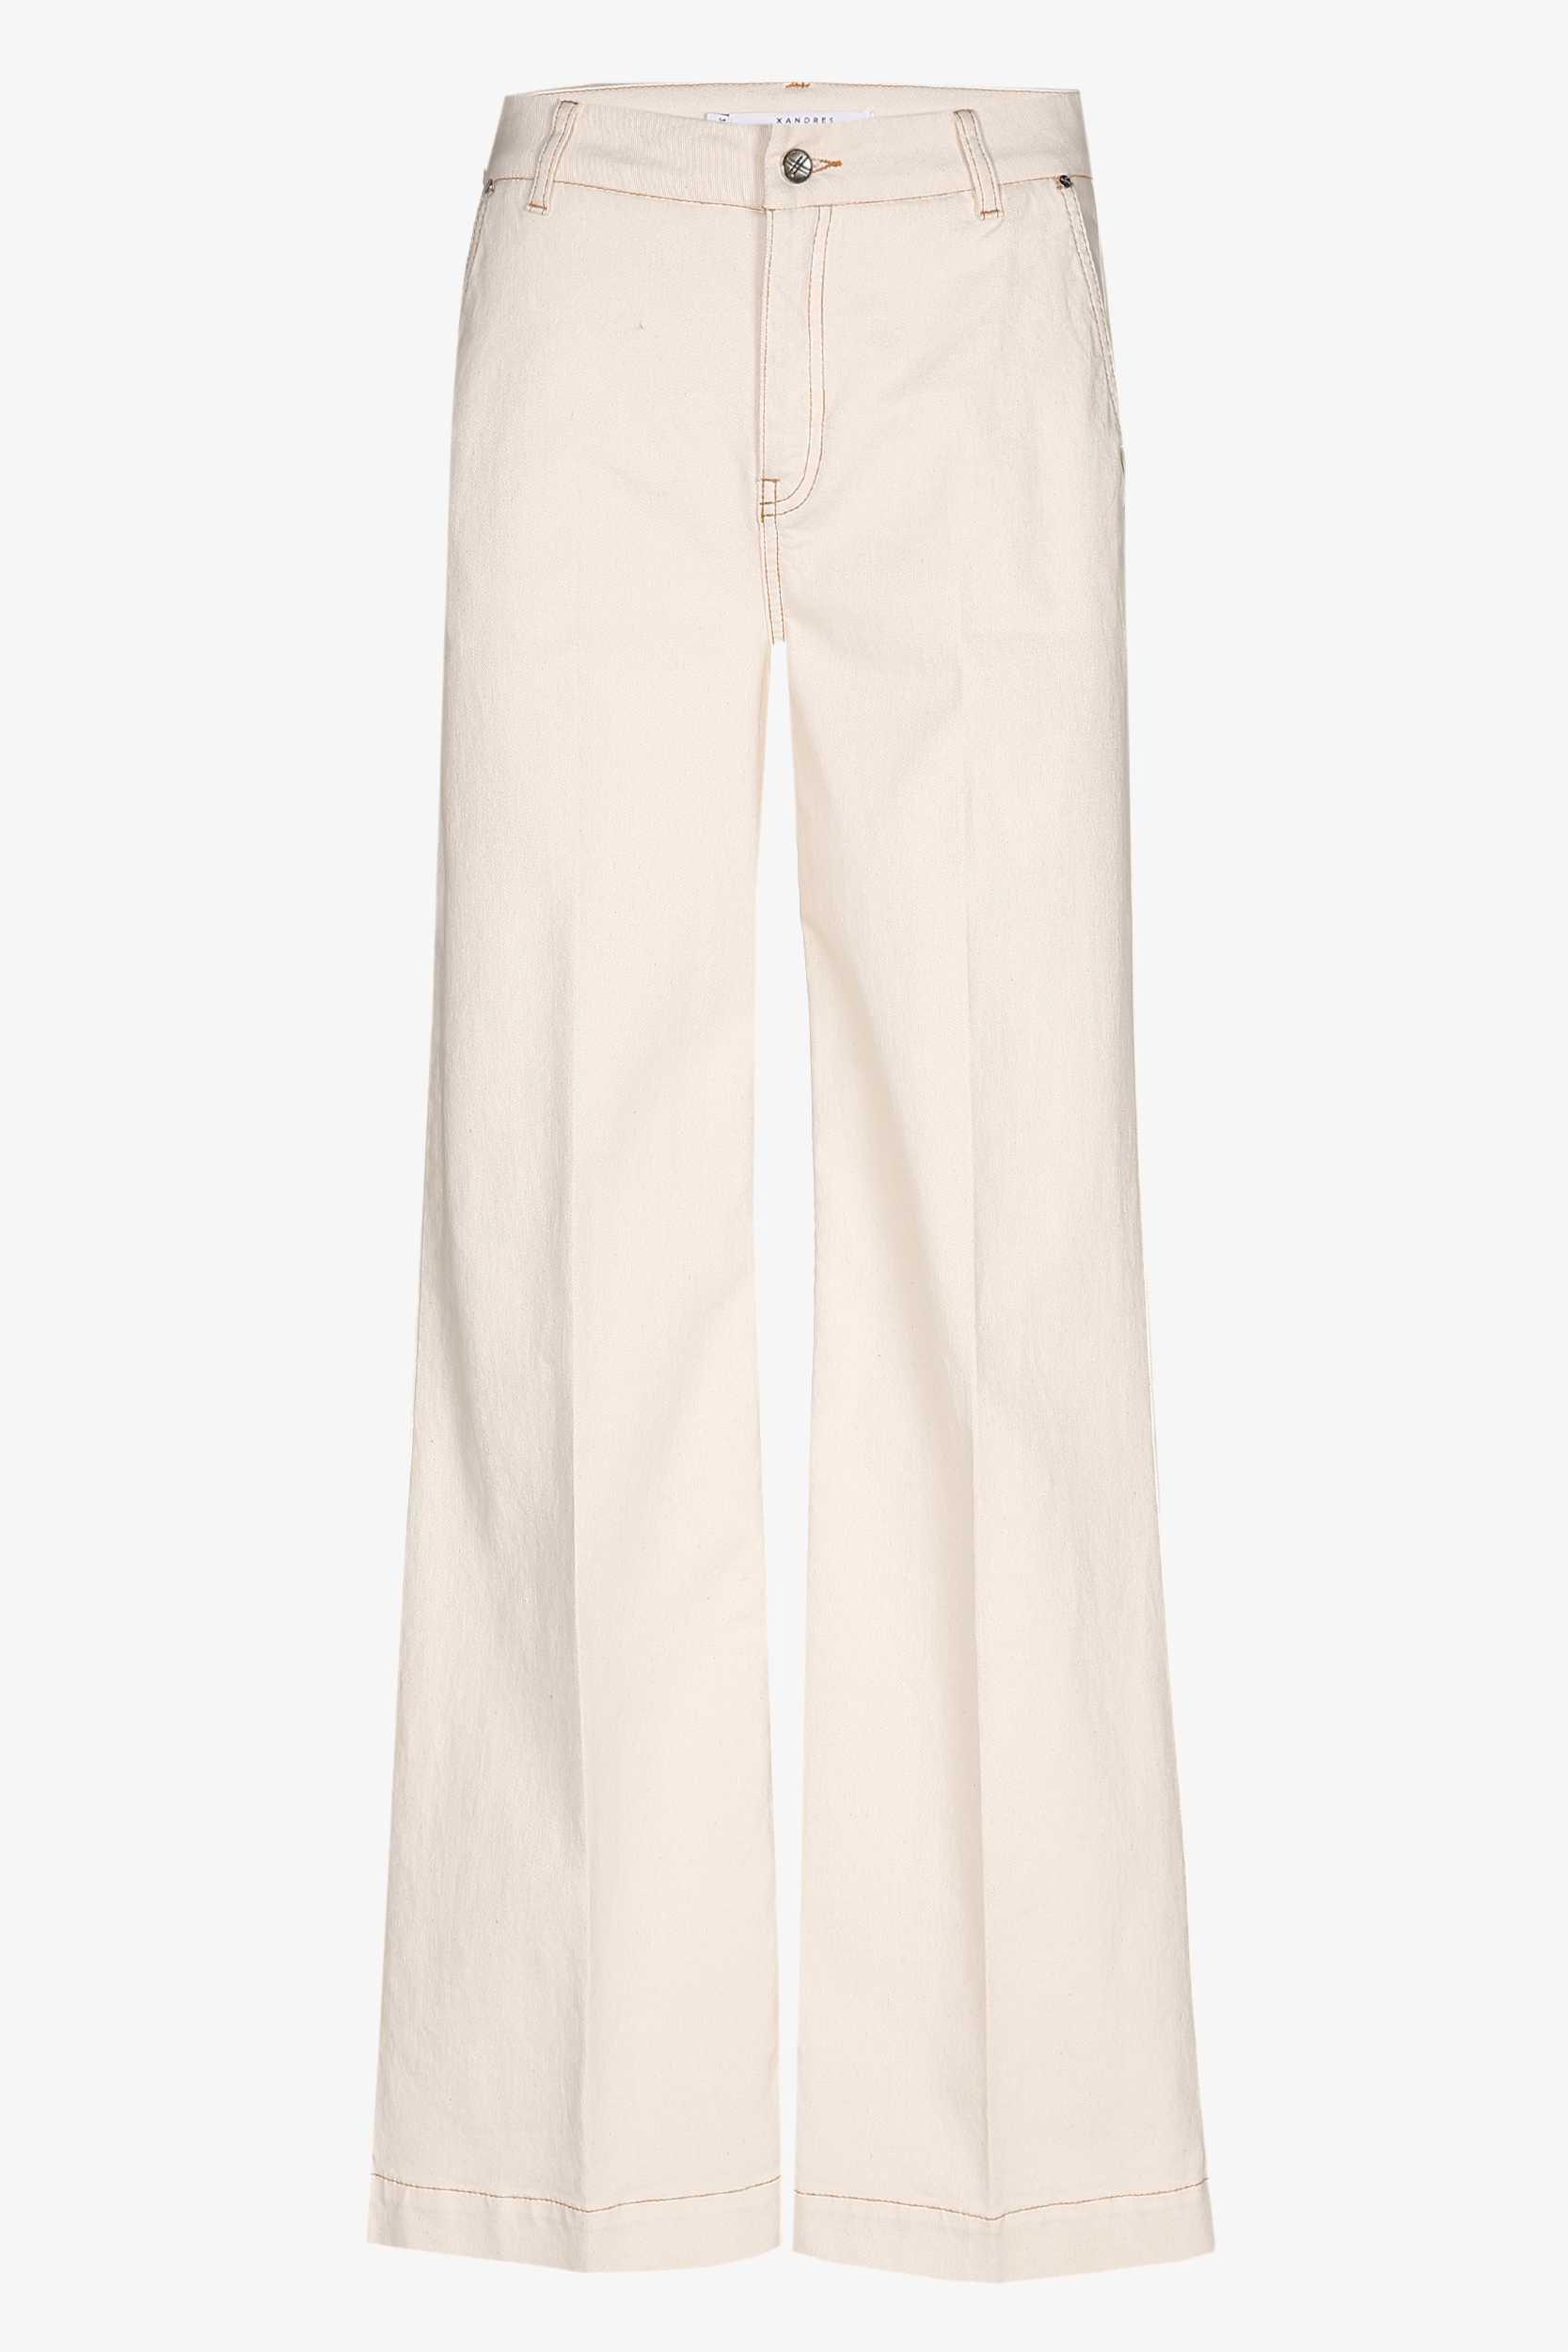 Cotton trousers with a denim-look